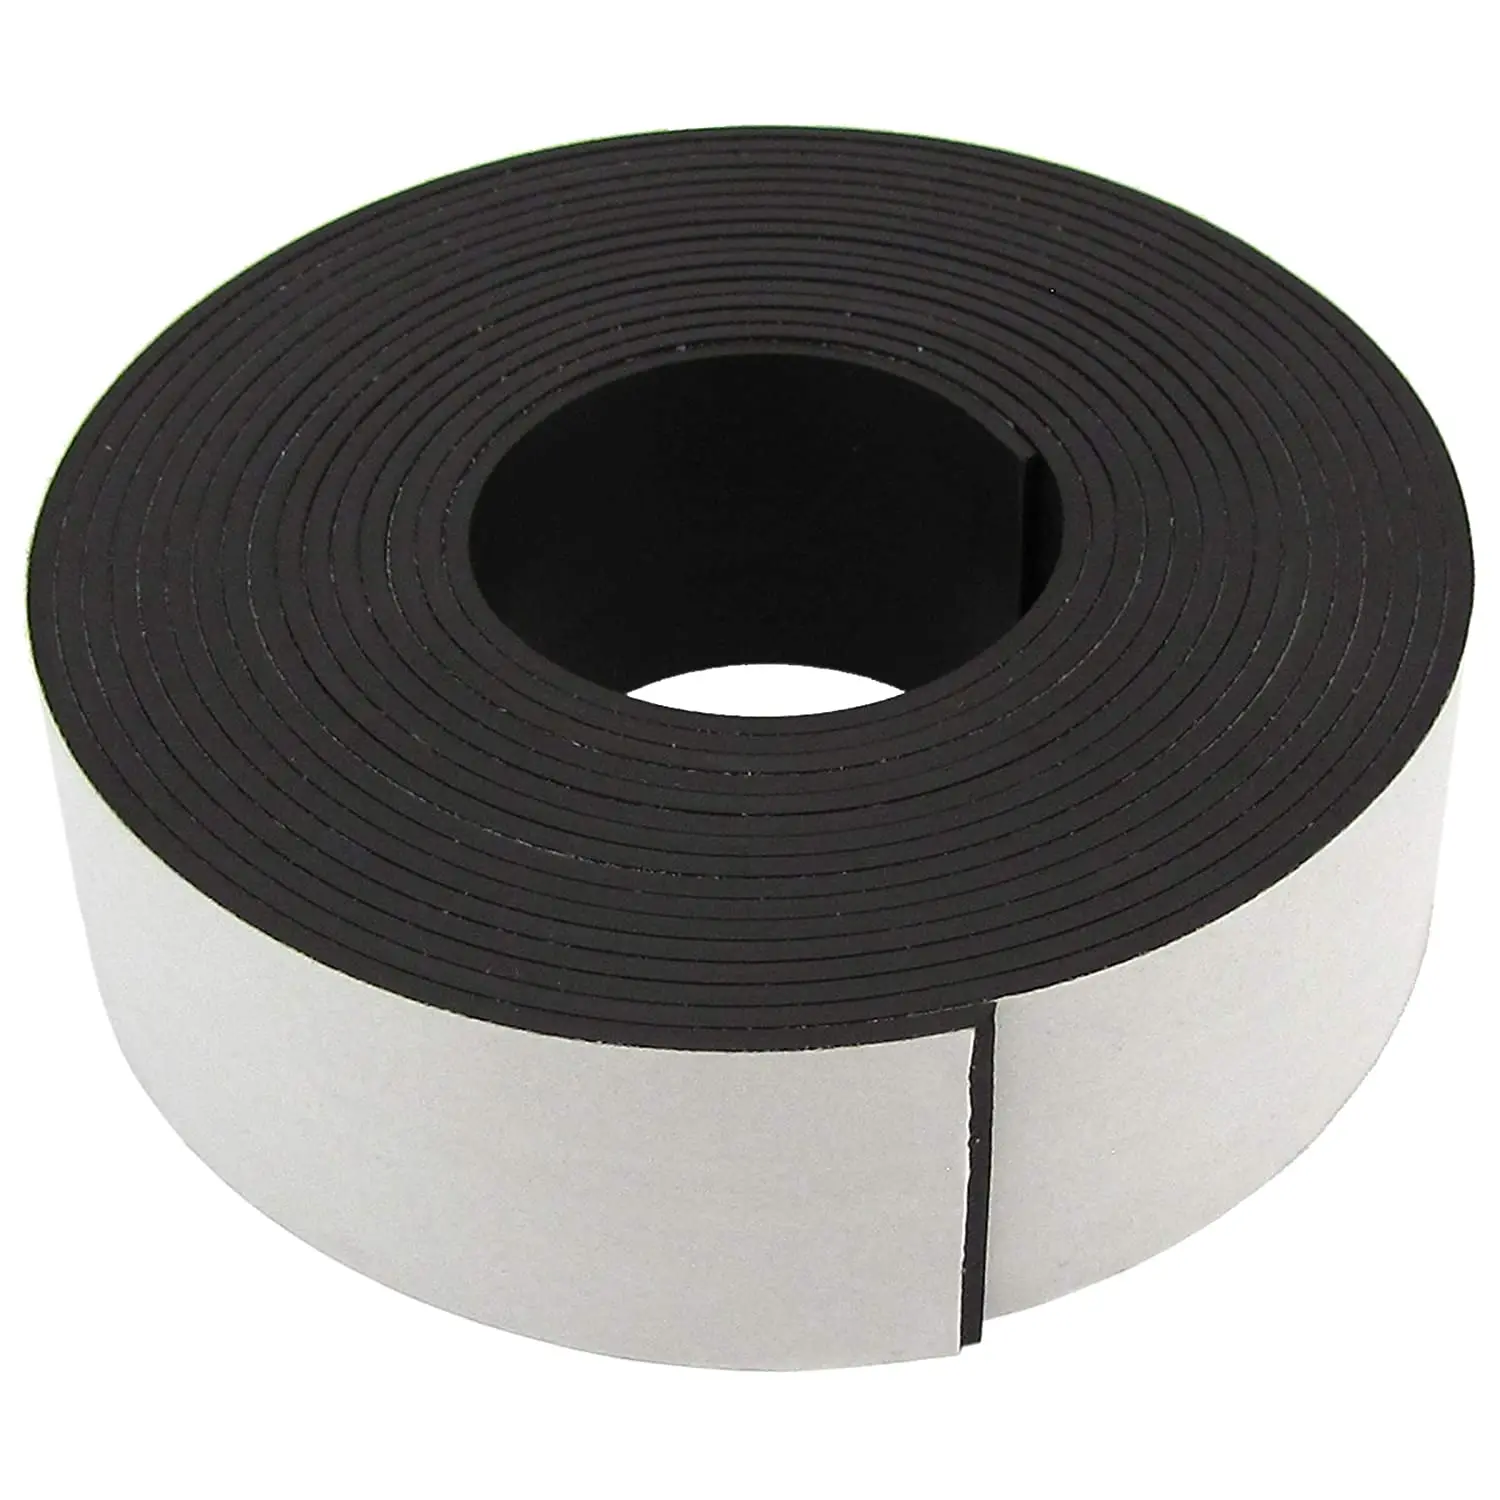 3M Self Adhesive magnetic tape dots discs sheets different sizes & thickness 